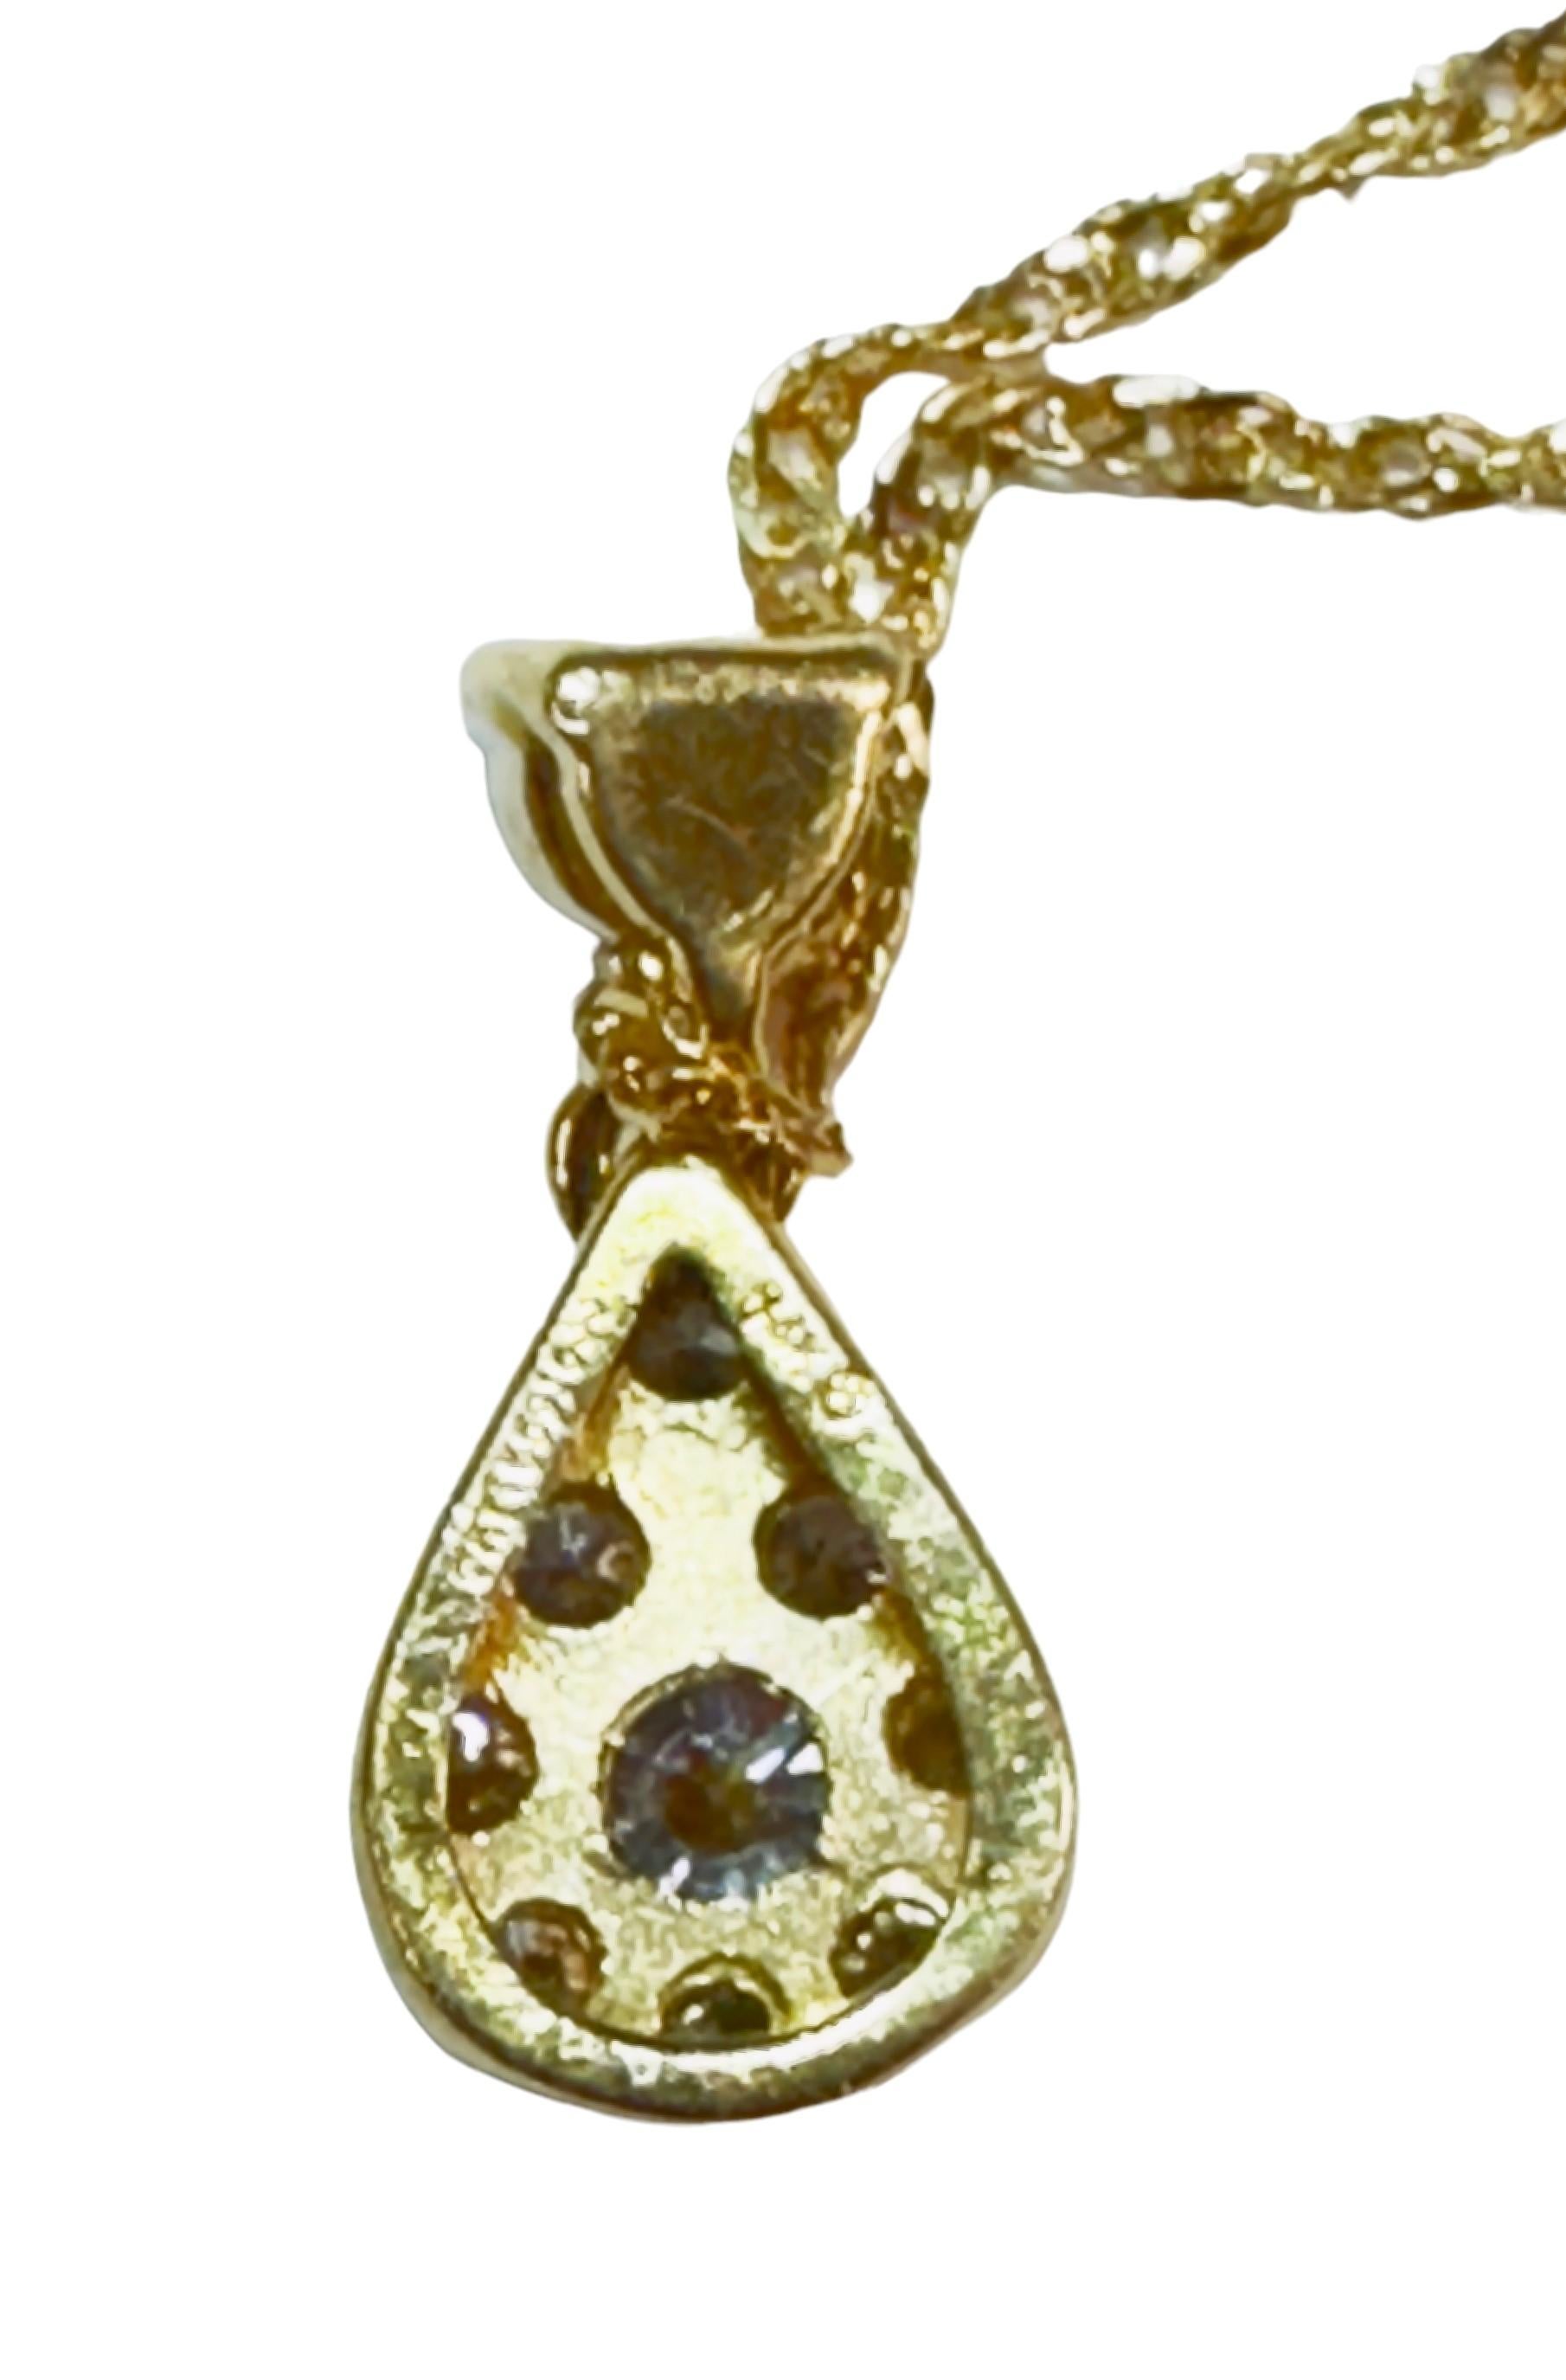 14k Yellow Gold .60 ct Diamond Cluster Pendant and 14k Gold Chain 18